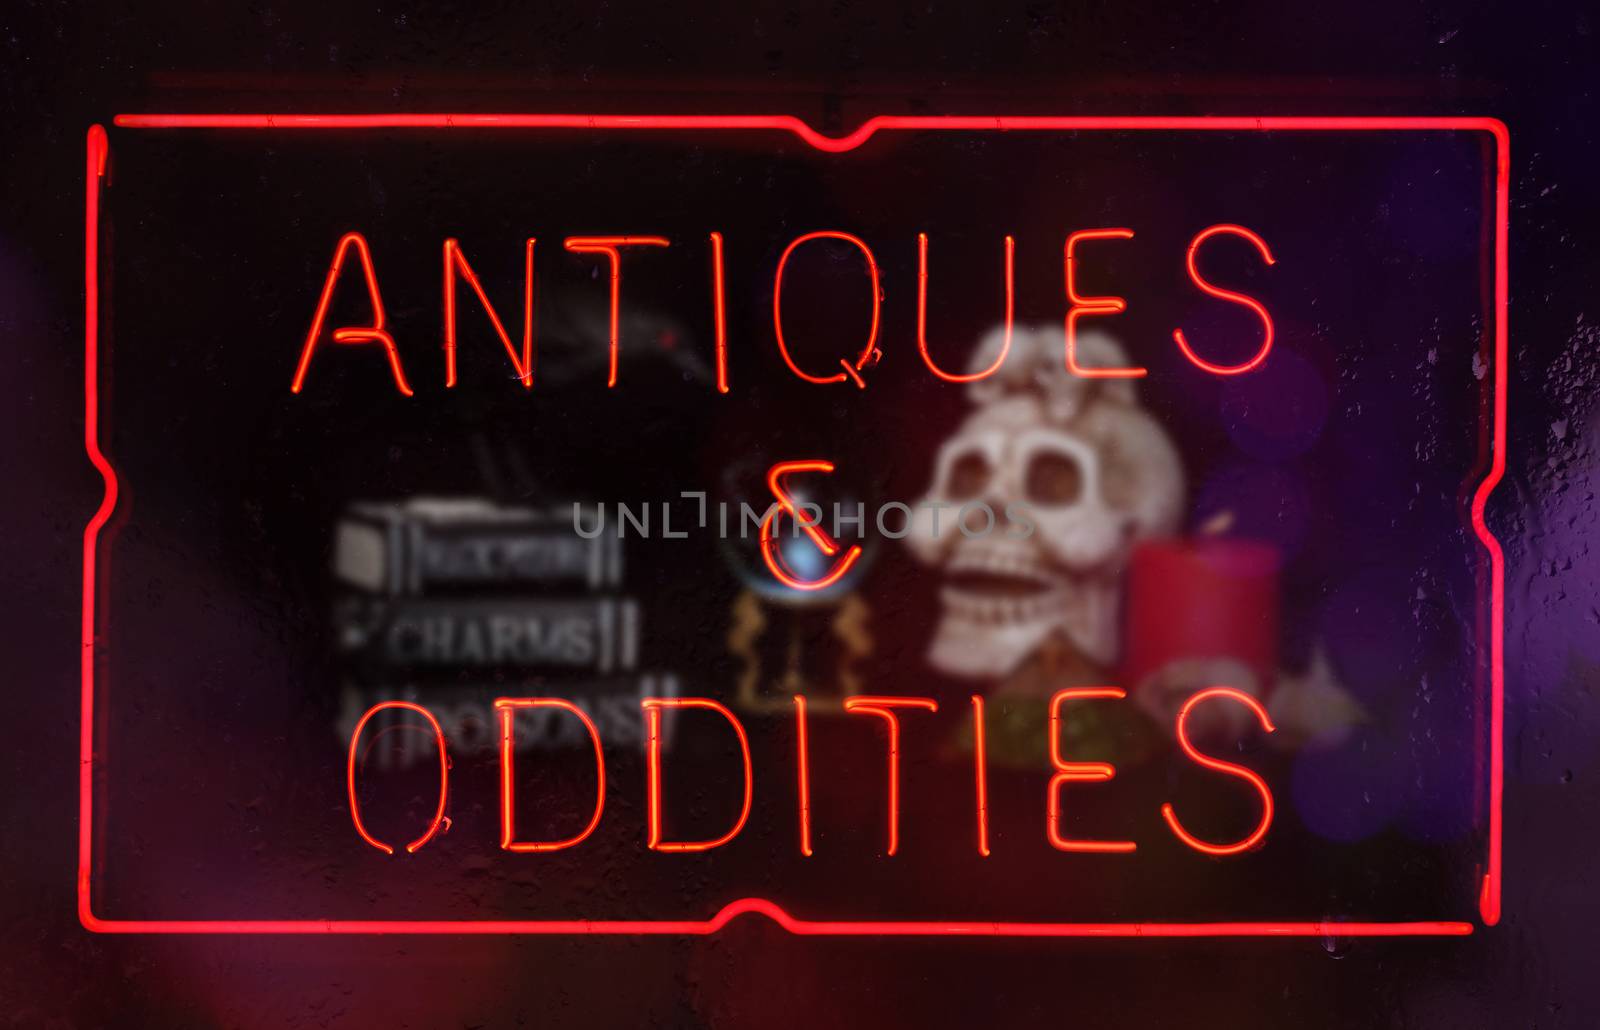 Oddities and Antiques Neon Sign in Shop Window Composite Image